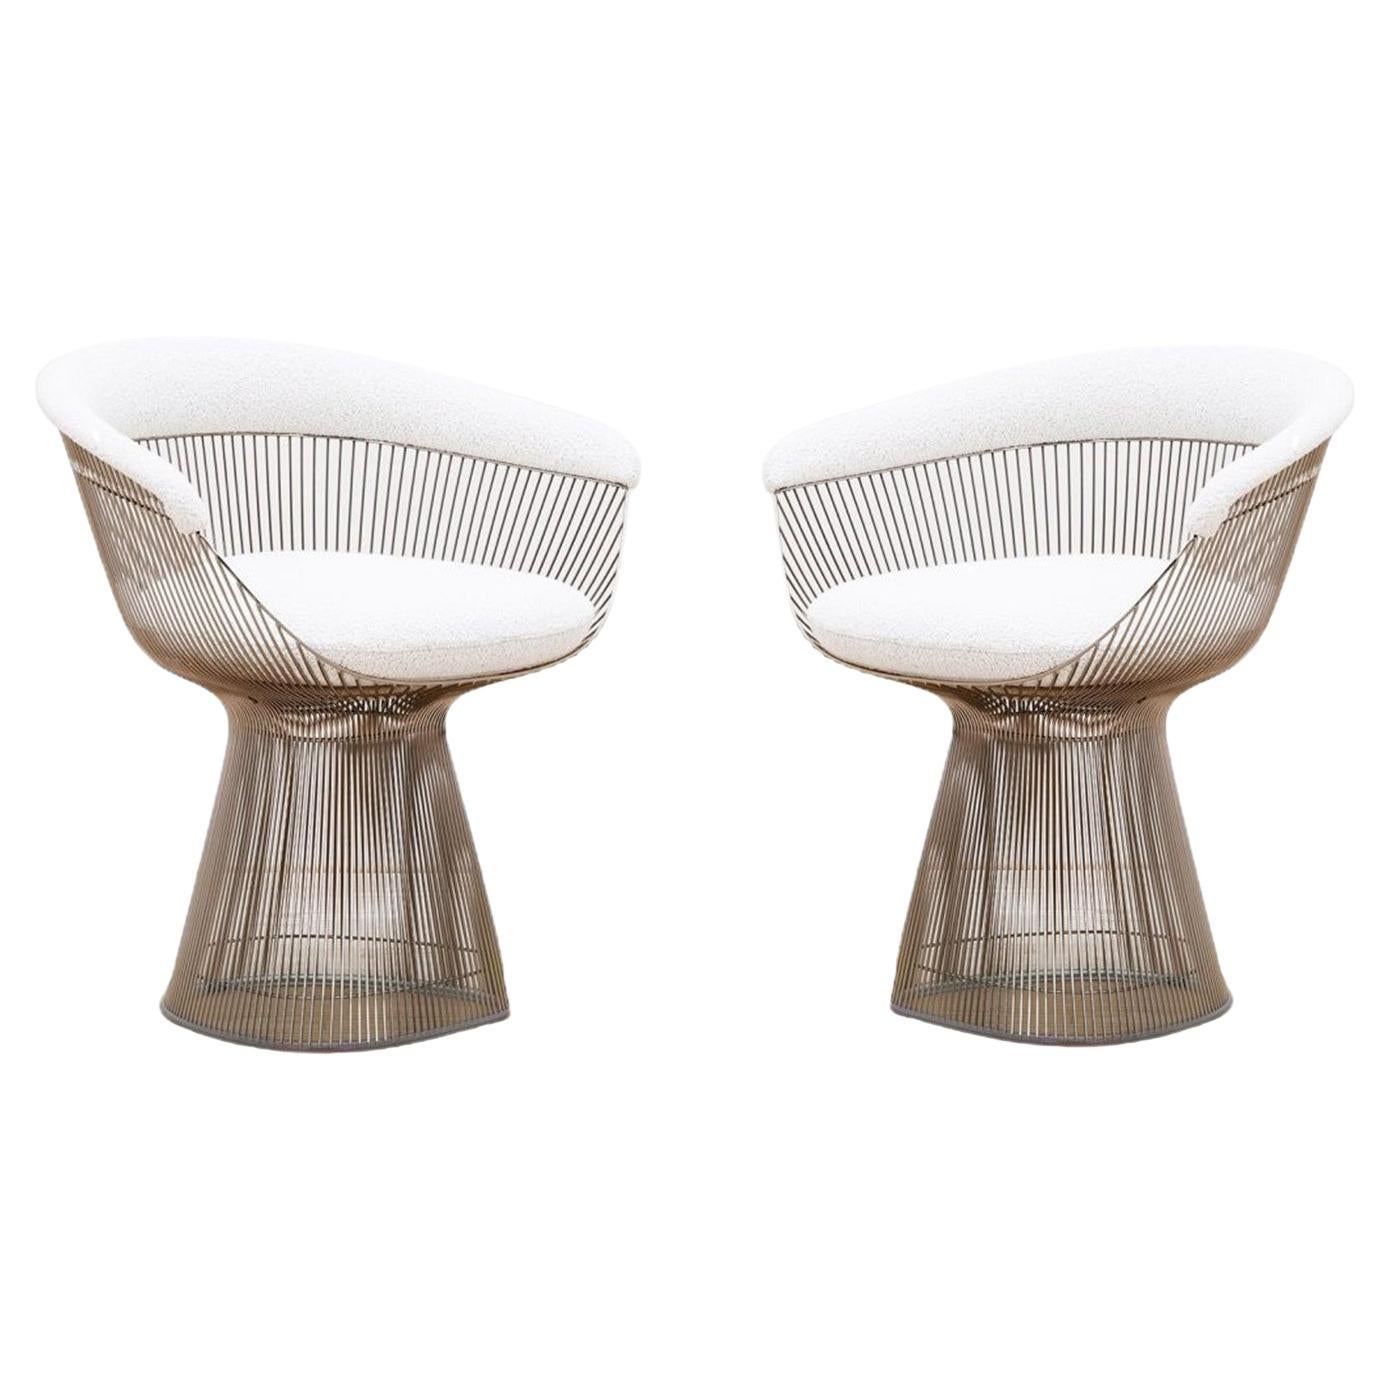 Pair Of Two Chairs Designed By Warren Platner, 1960's For Sale